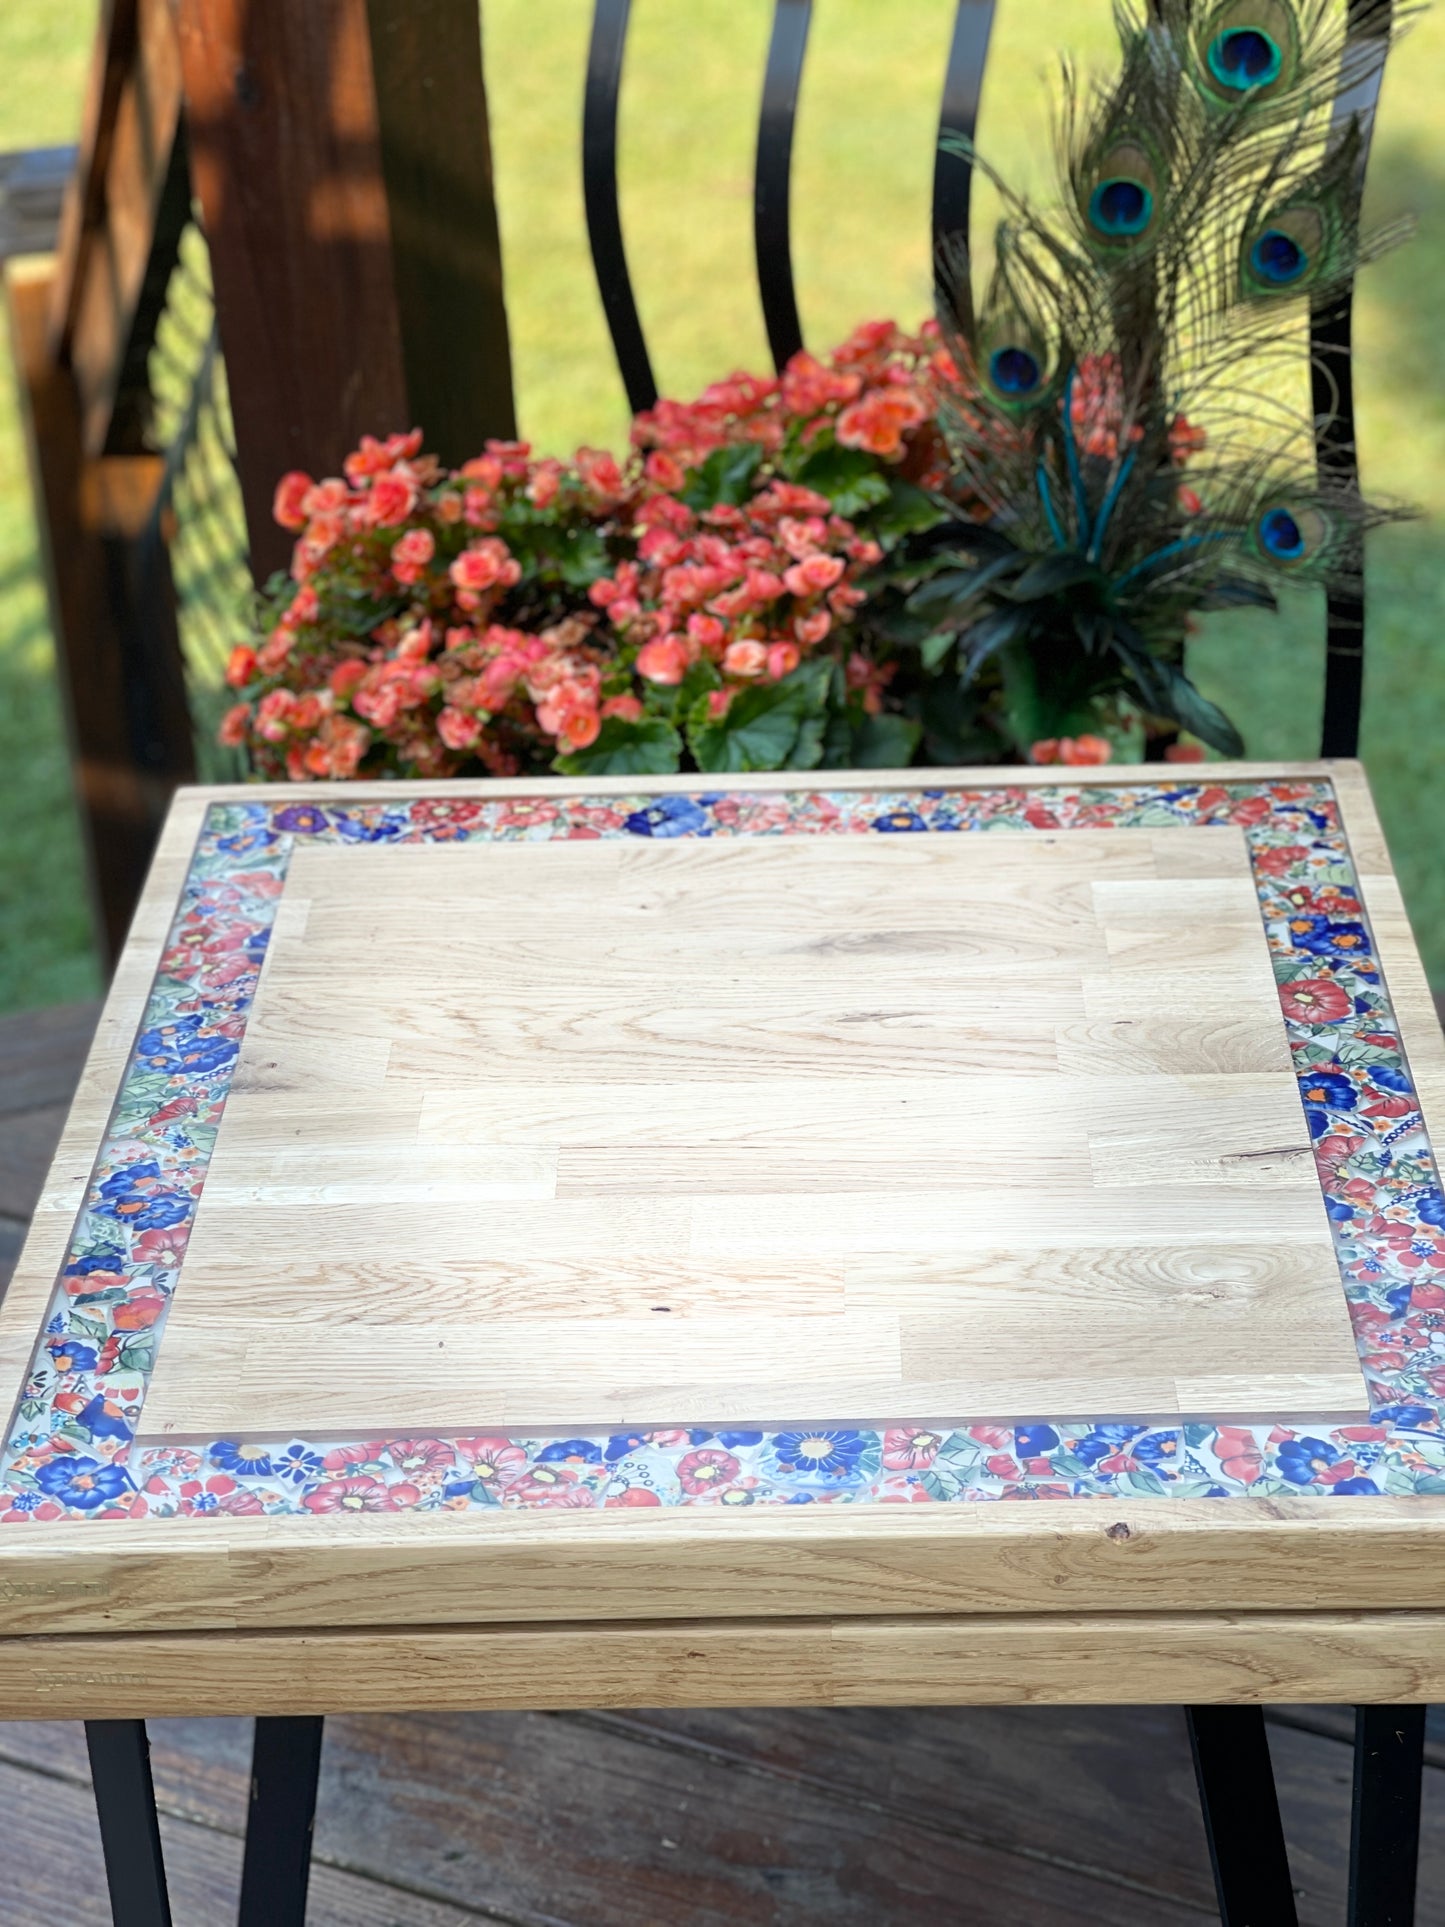 23"x23"x19" Square Table. Pattern: Red Flower